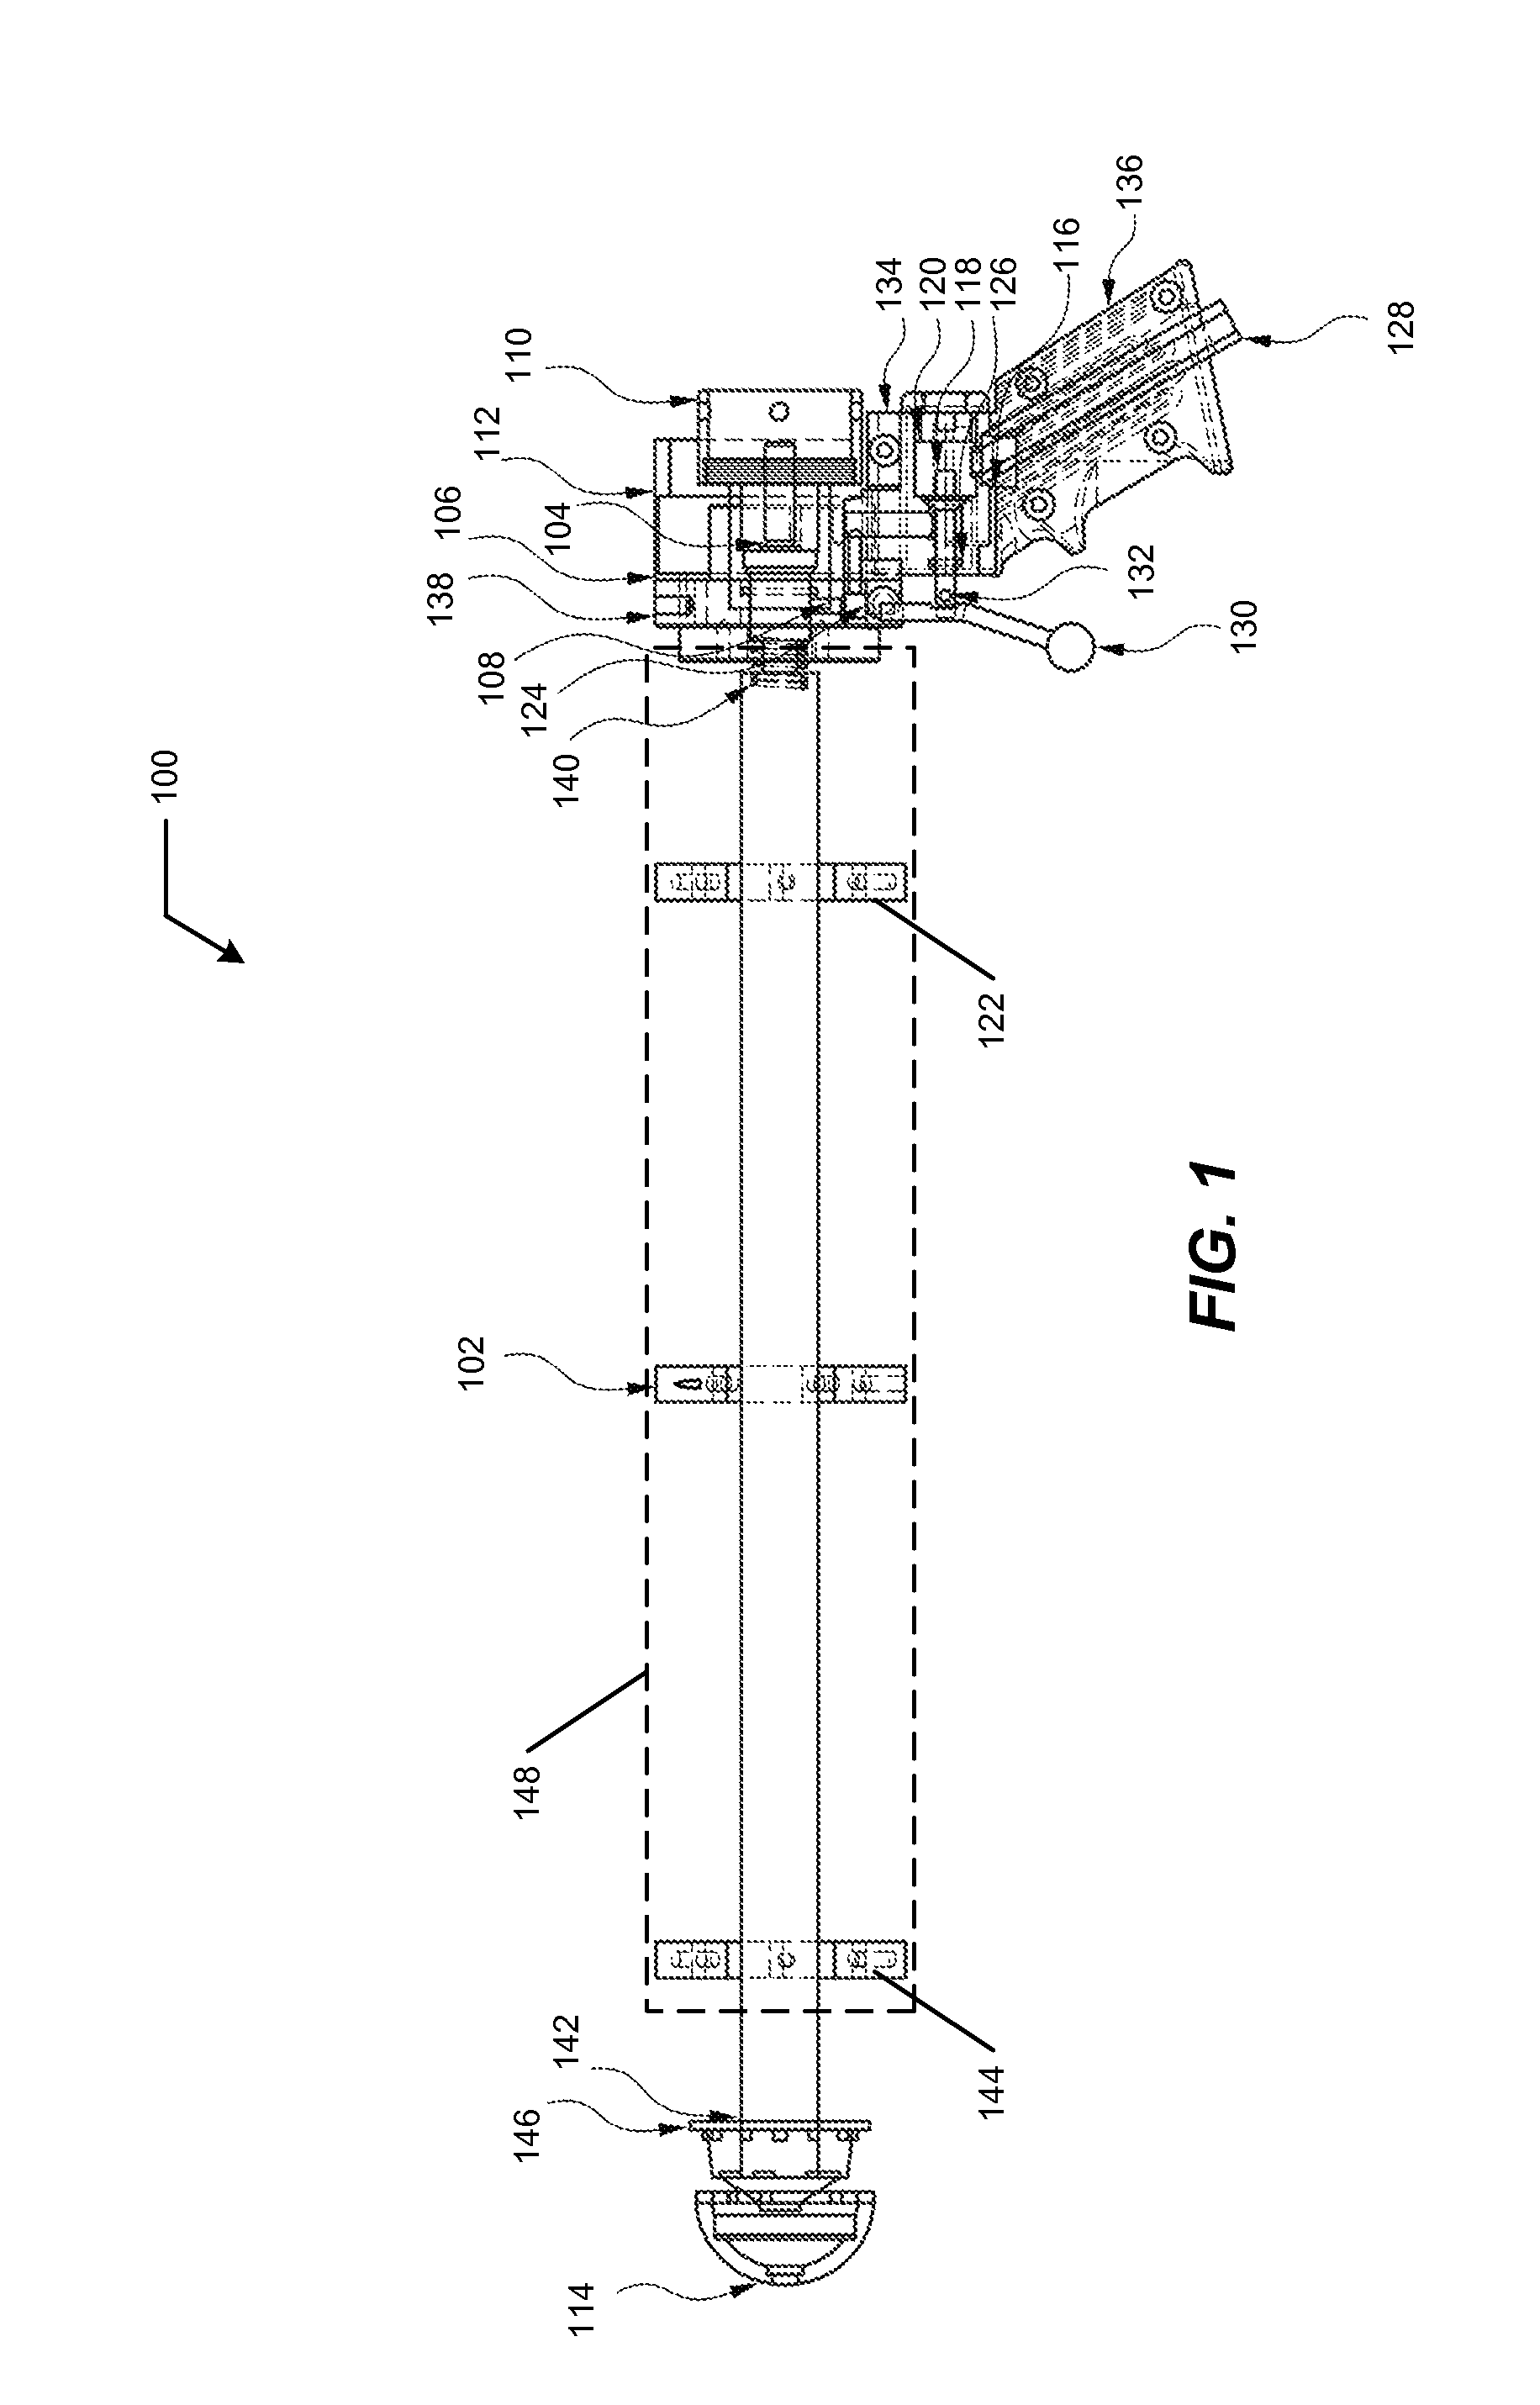 Prosthesis positioning systems and methods